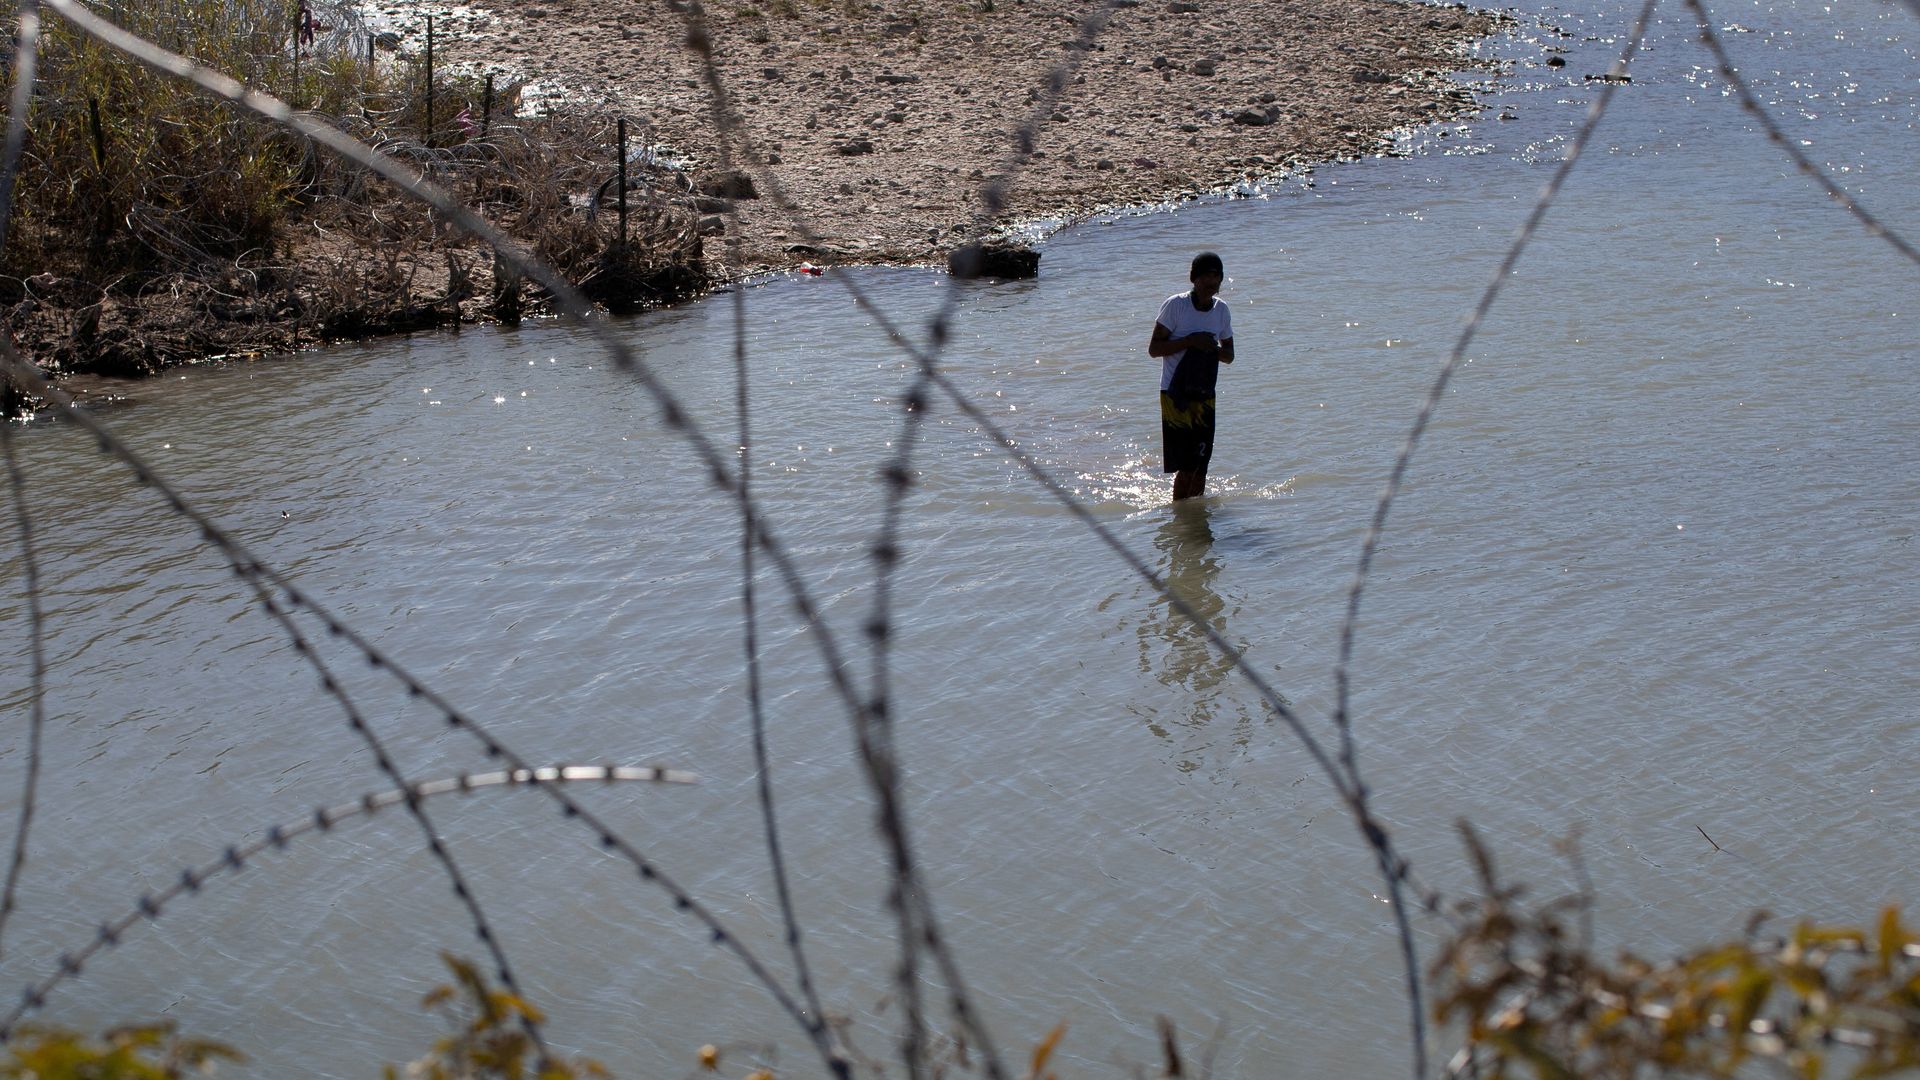 A mother and two children have drowned trying to cross into Texas. The tragedy has pitted federal and state officials against each other.